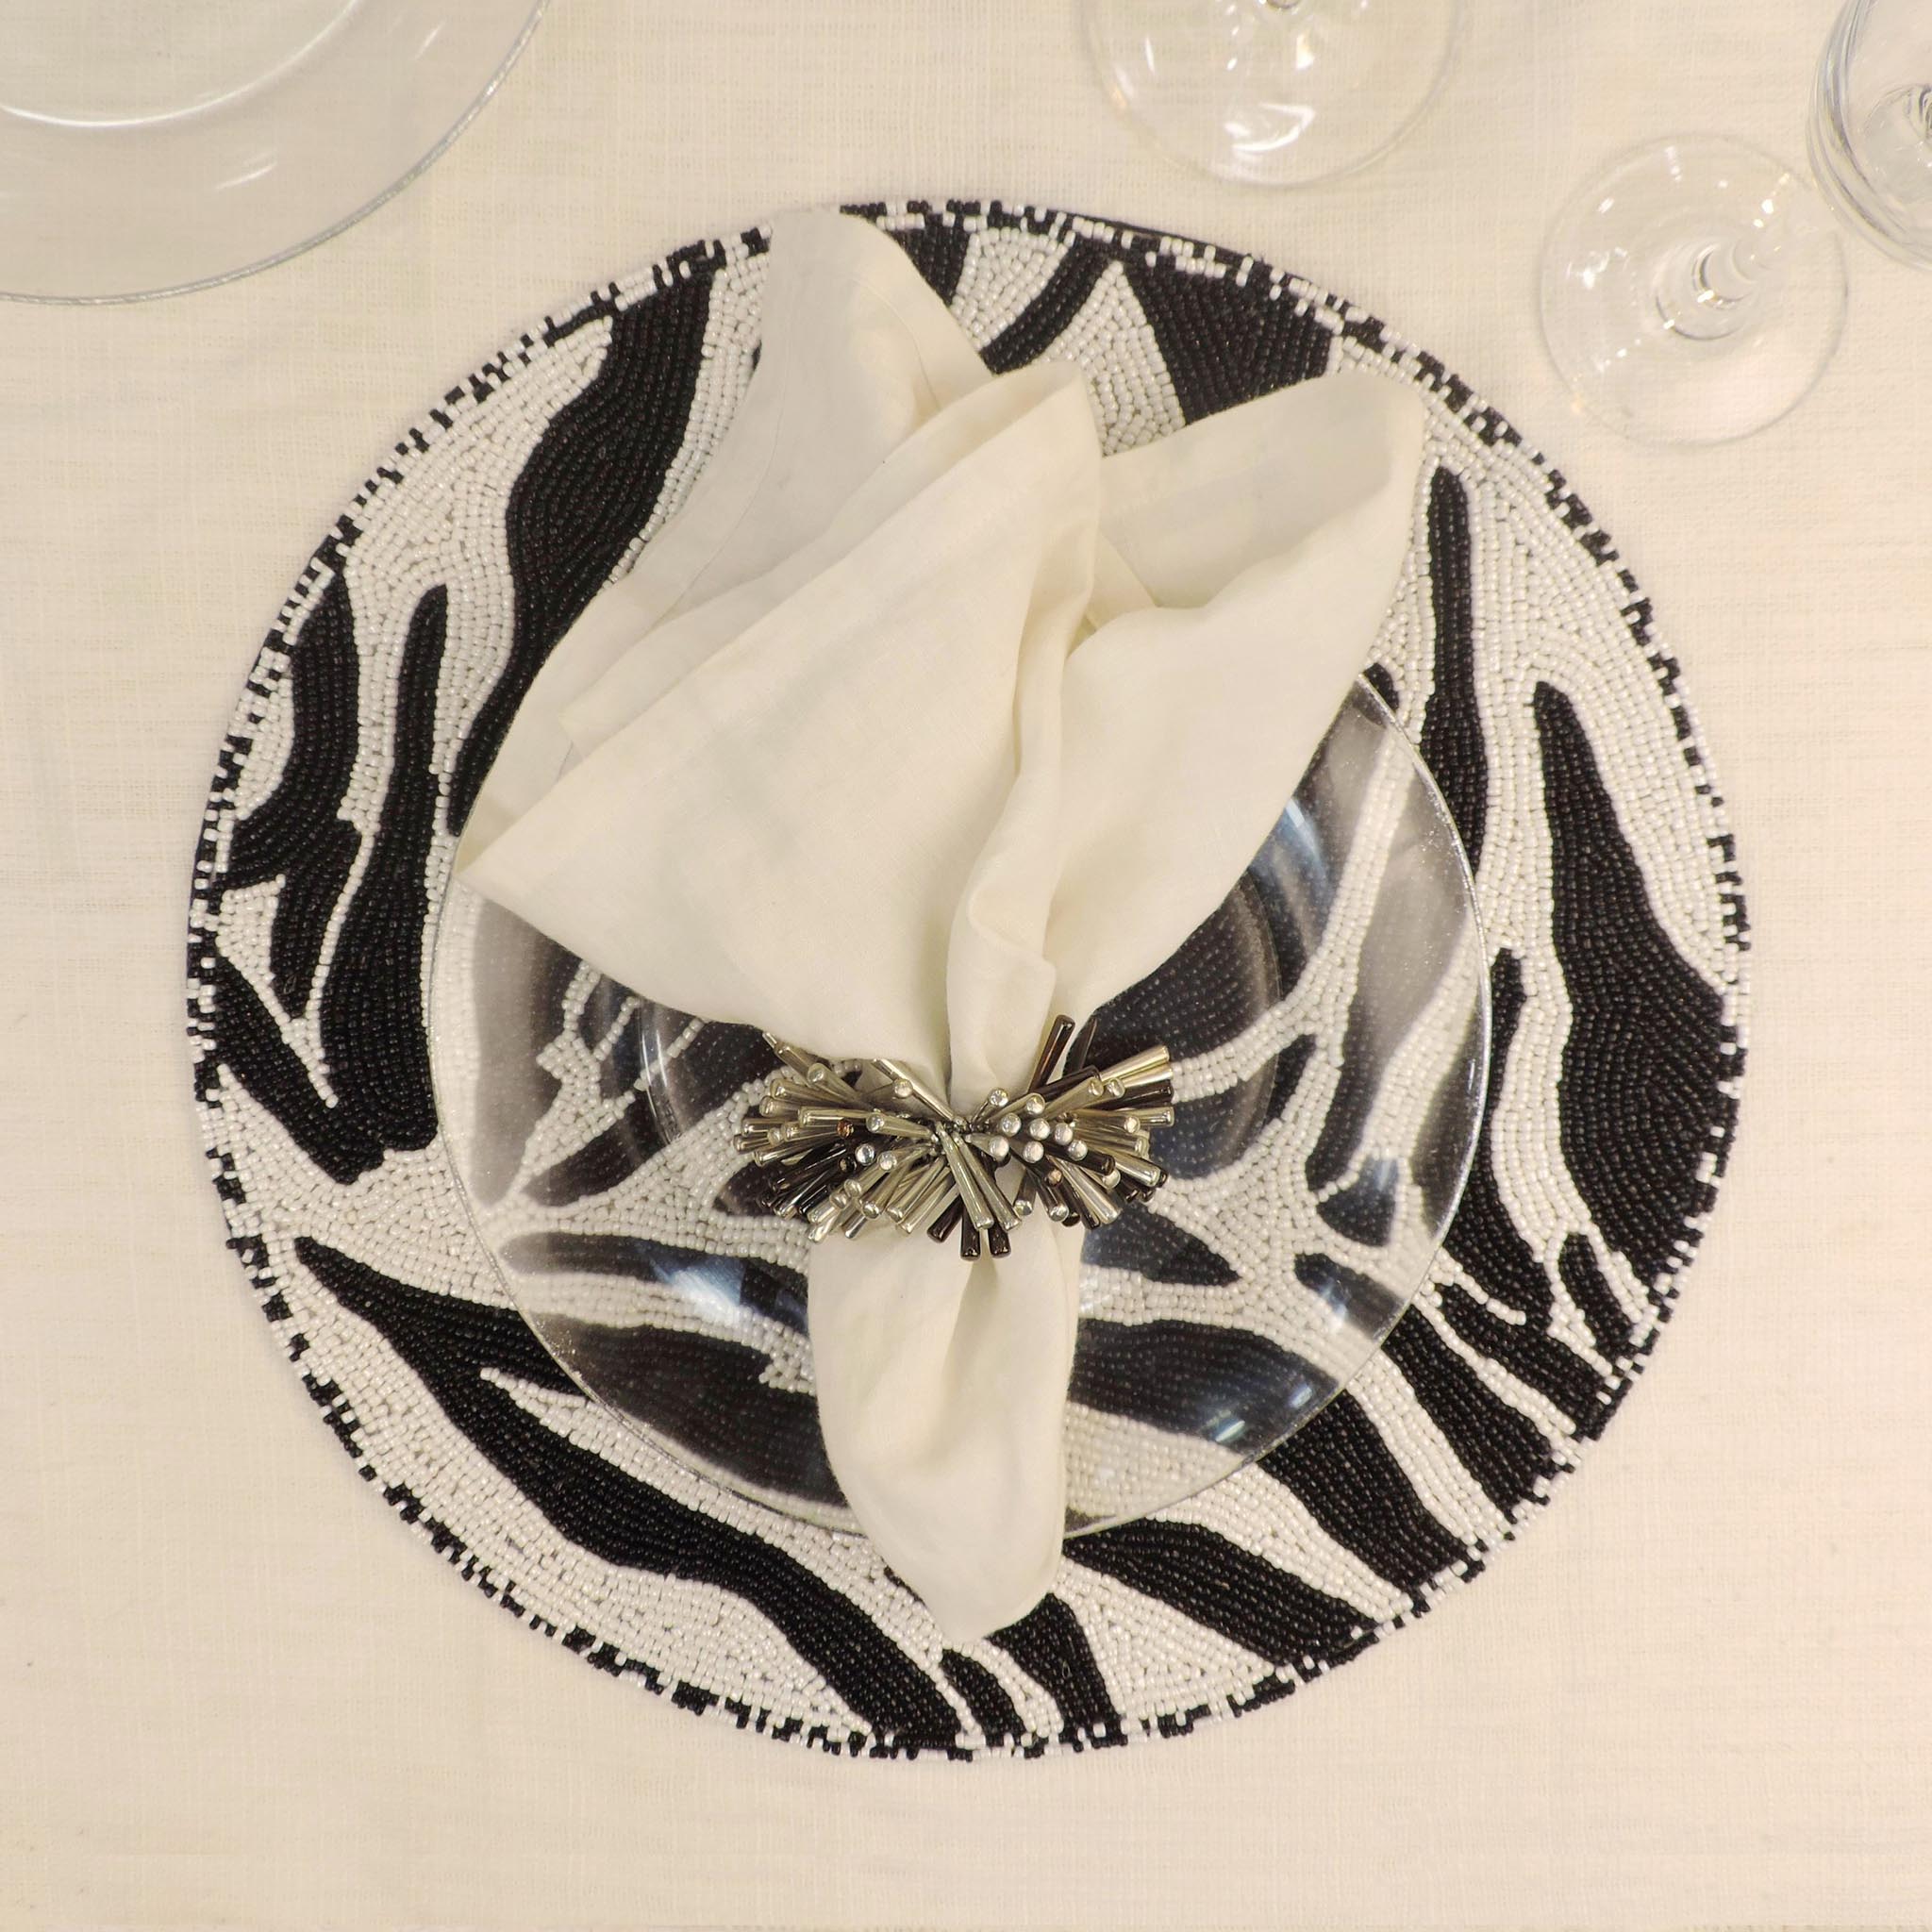 Modern Camo Glass Bead Embroidered Placemat in Black & White, Set of 2/4